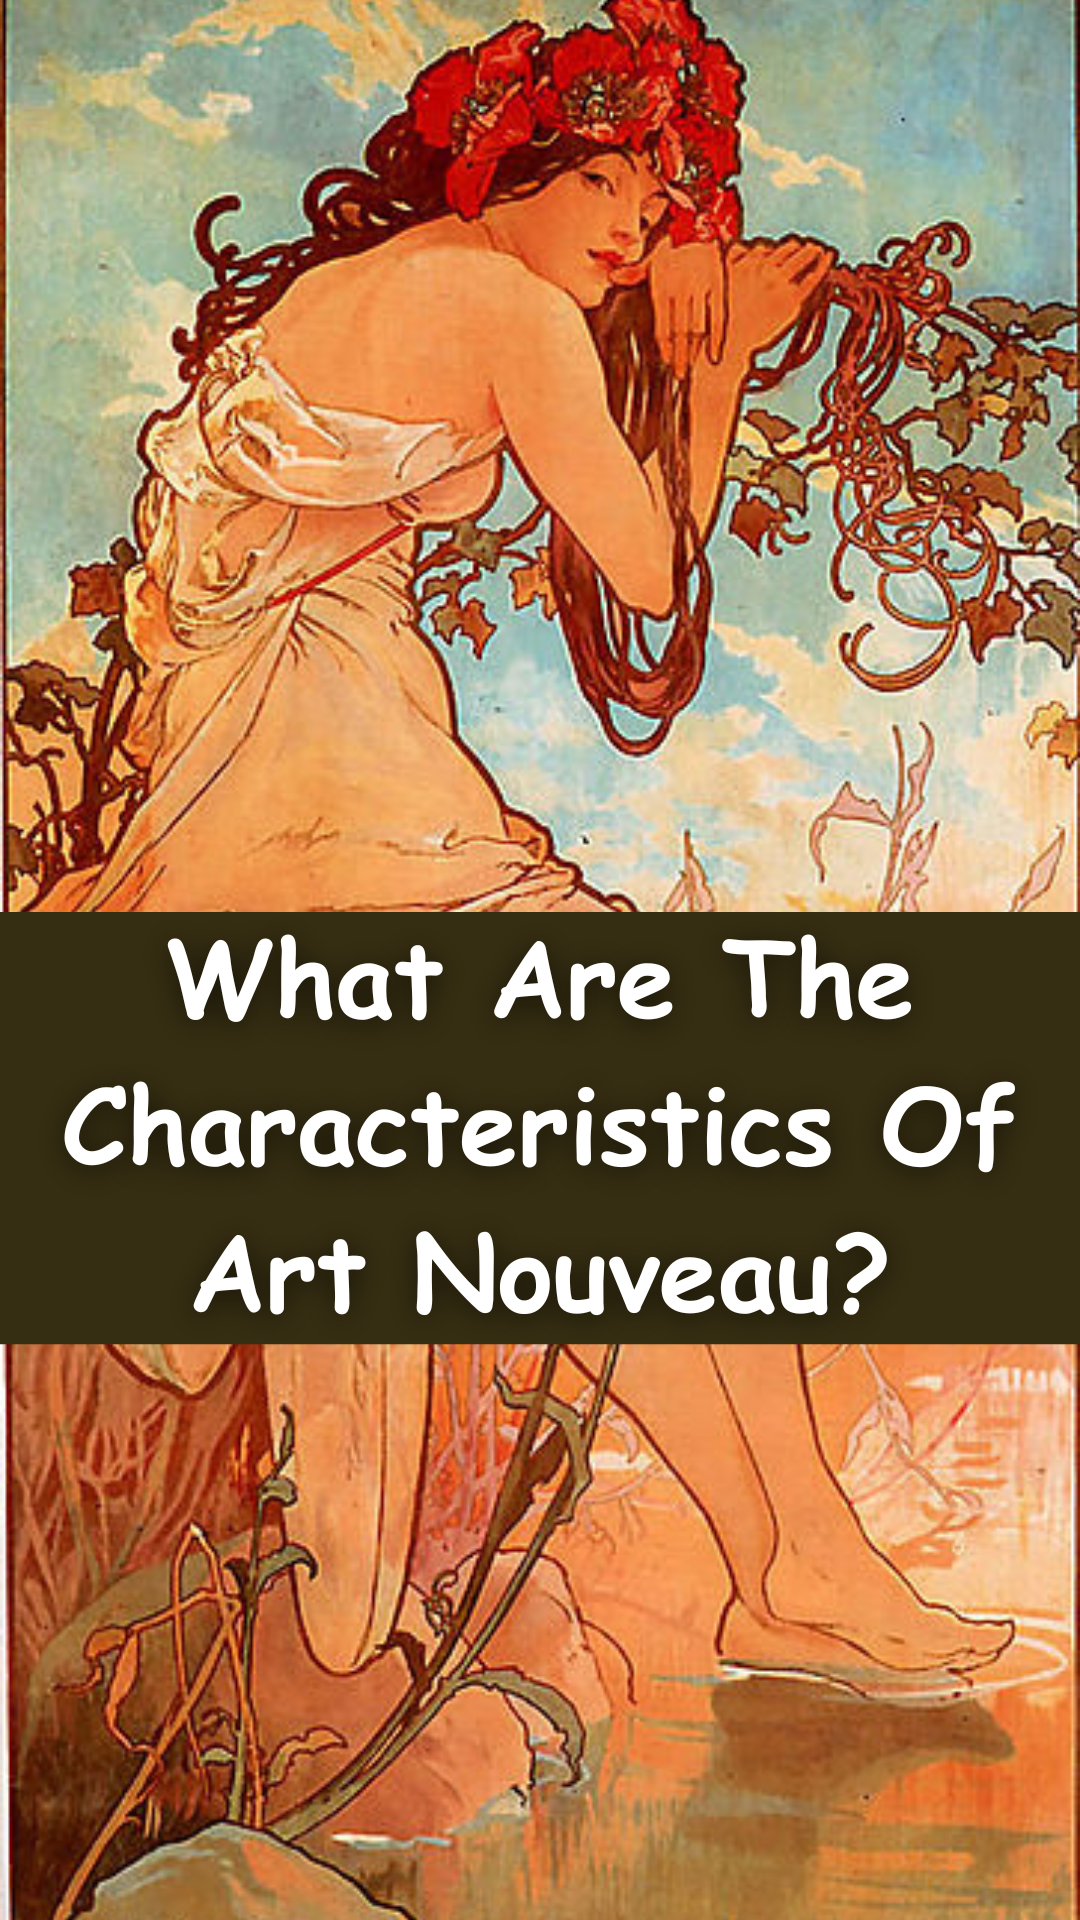 What Are The Characteristics Of Art Nouveau?